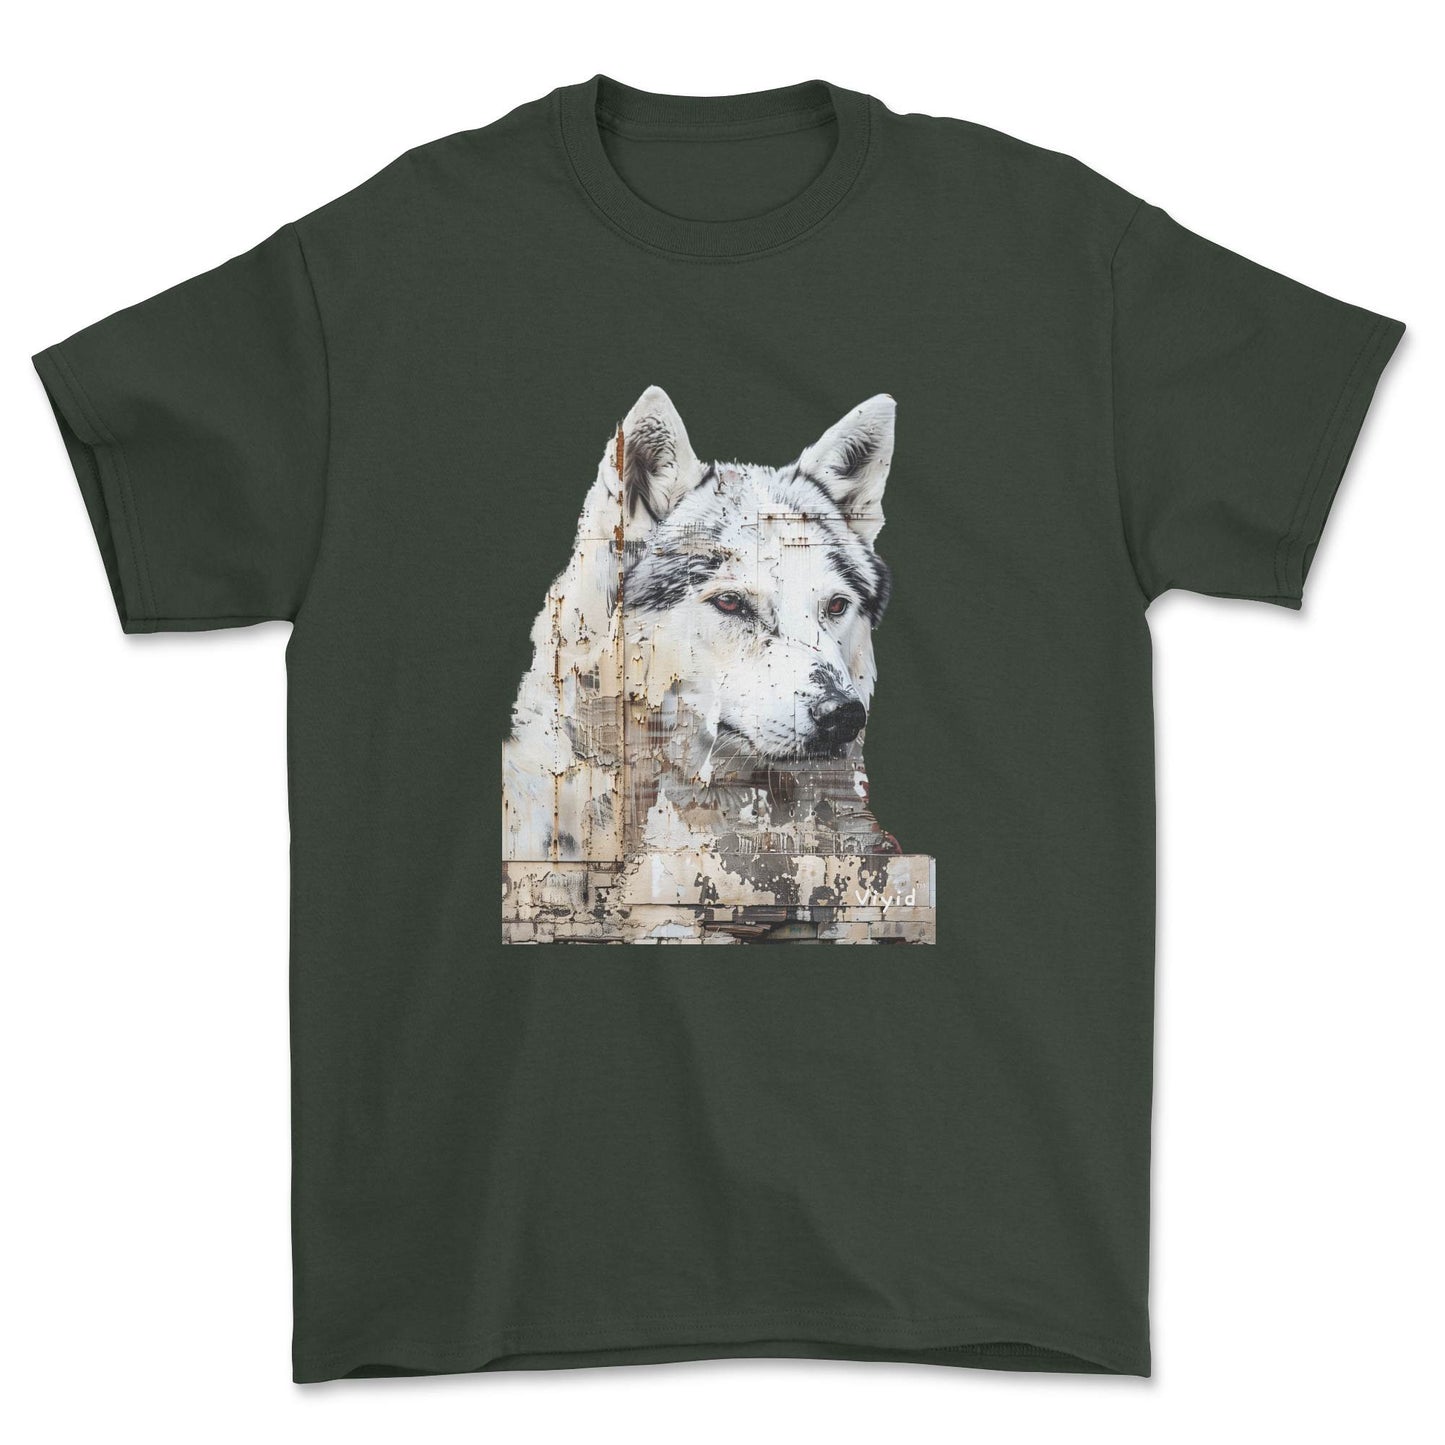 Siberian Husky youth t-shirt forest green